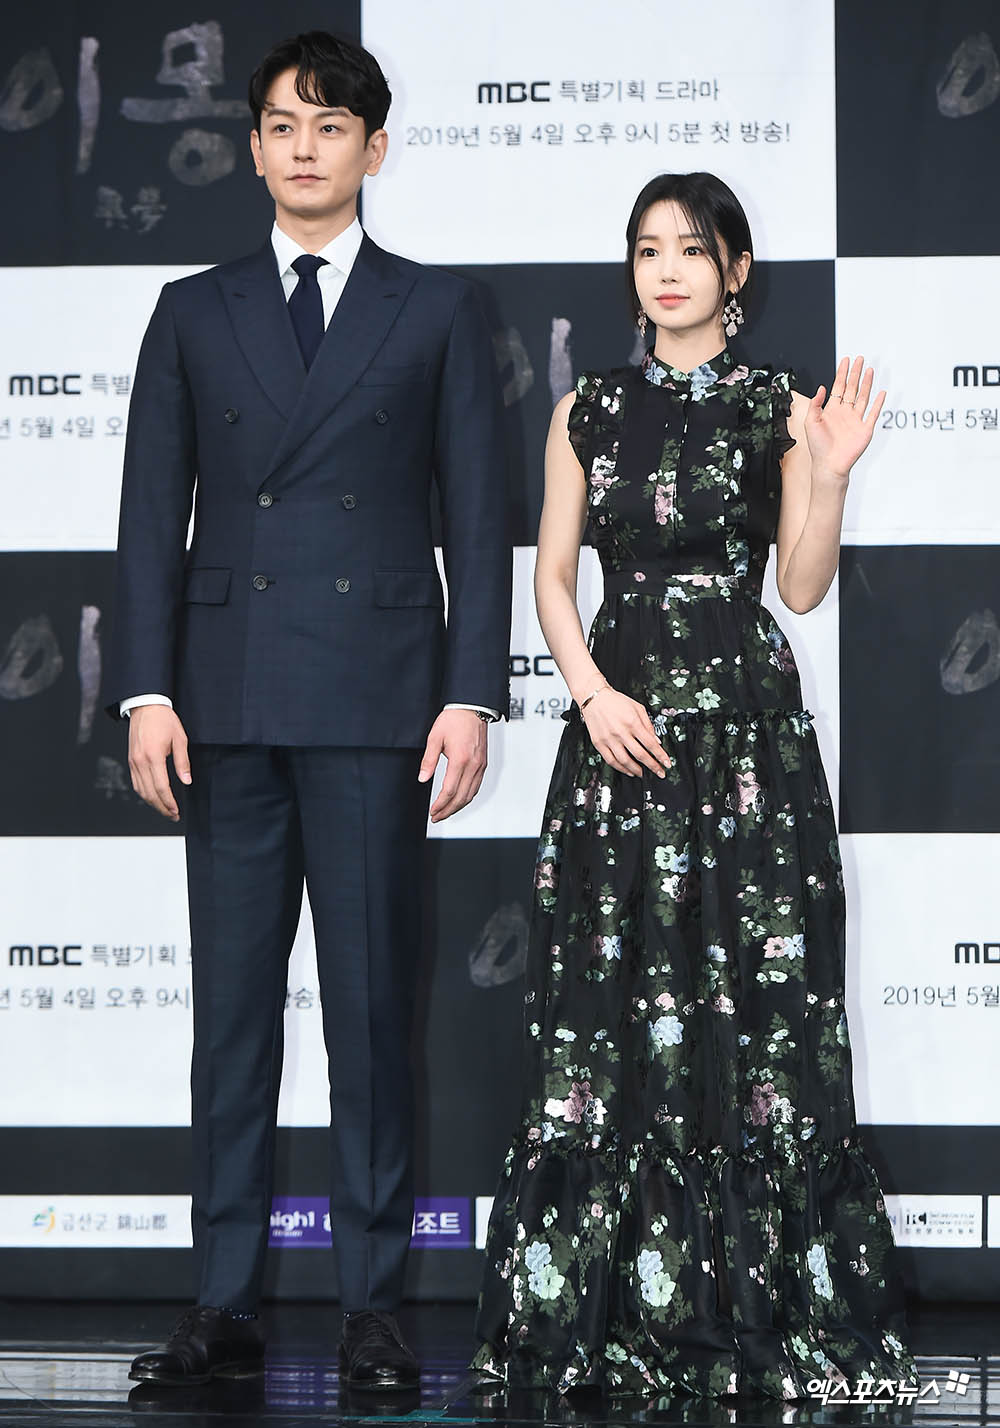 Actors Lim Ju-hwan and Nam Gyu-ri attended the MBC new weekend drama Imong production presentation held at MBC in Sangam-dong, Seoul on the afternoon of the afternoon.